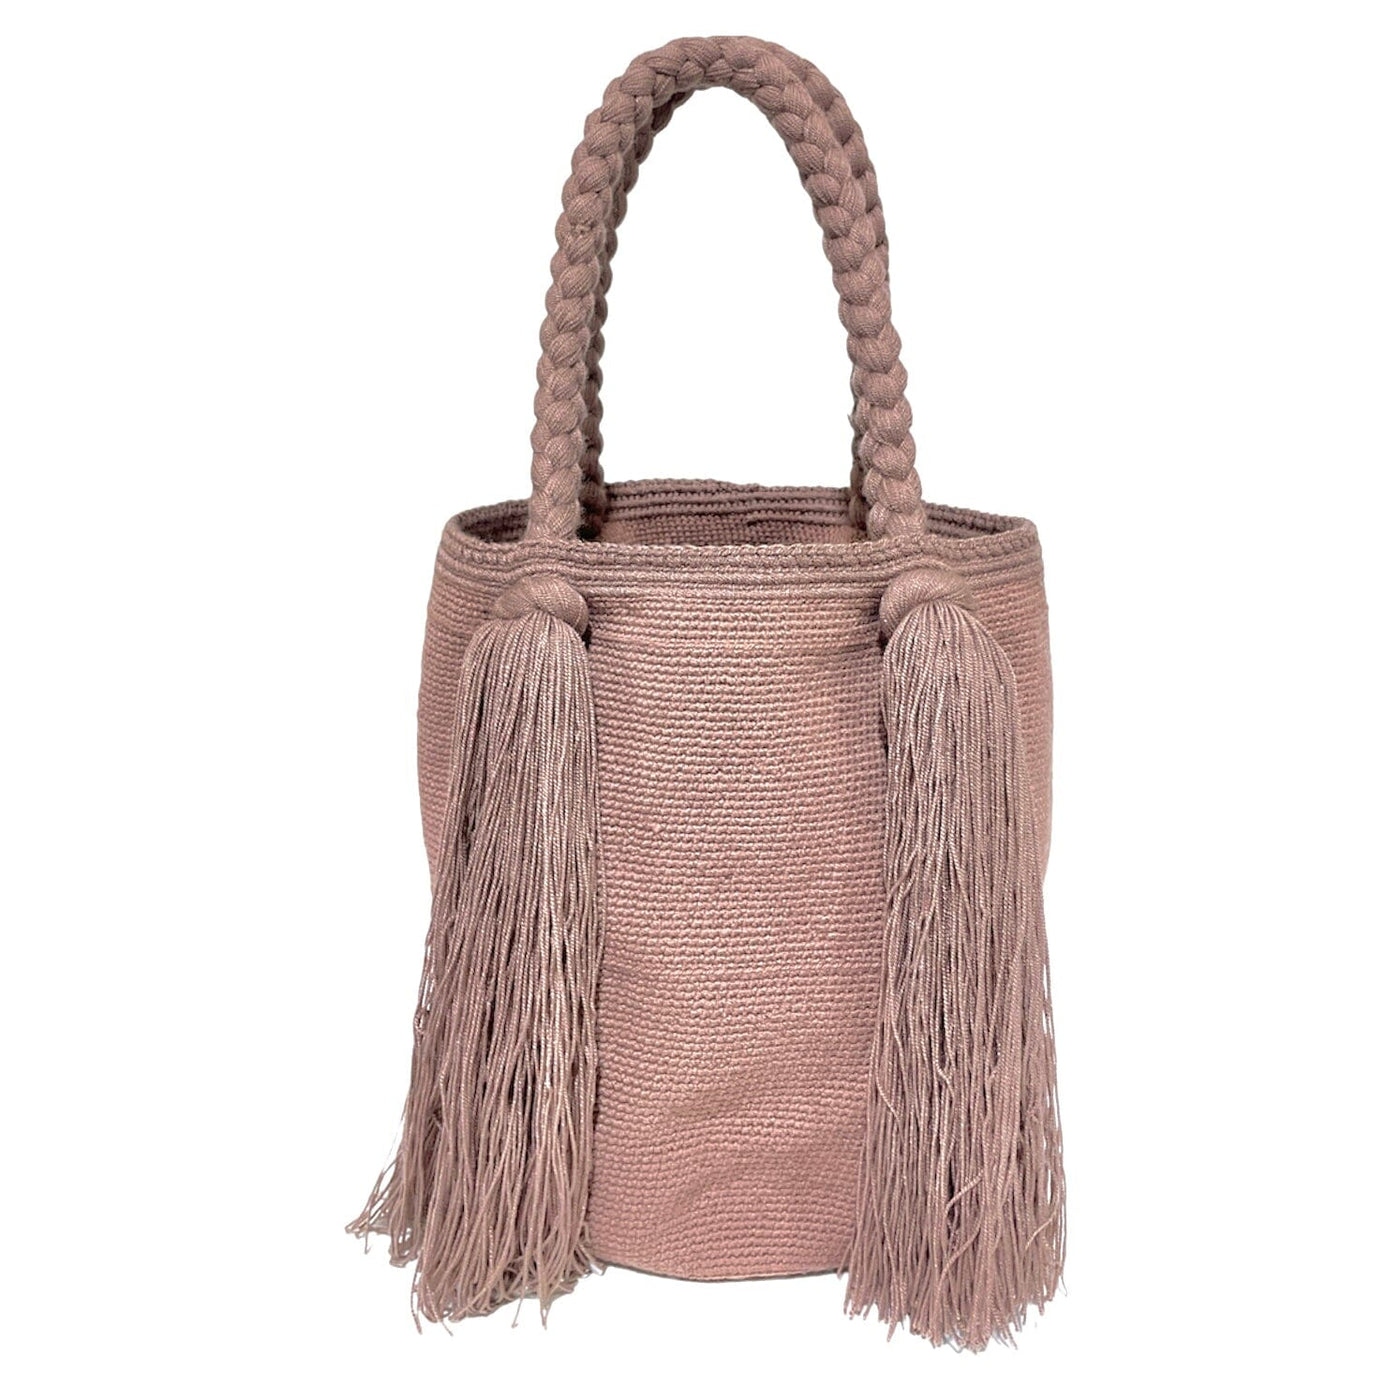 Rose Taupe Best Summer Tote Beach Bags | Trending Summer Tote Bags with Tassels Colorful 4U